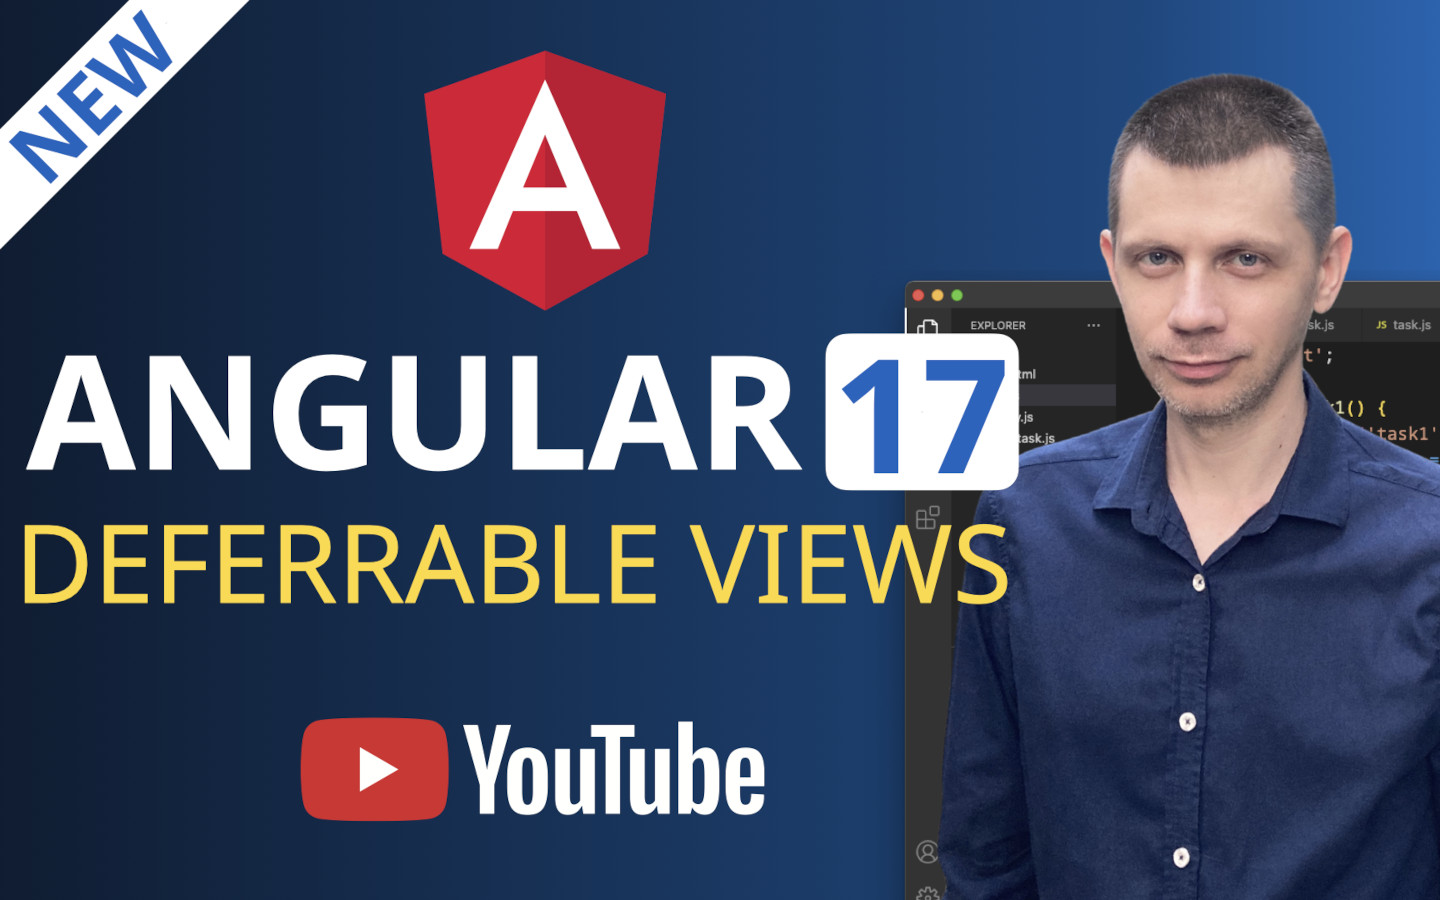 New Angular 17 Feature on YouTube: Deferrable Views and Deferred Loading